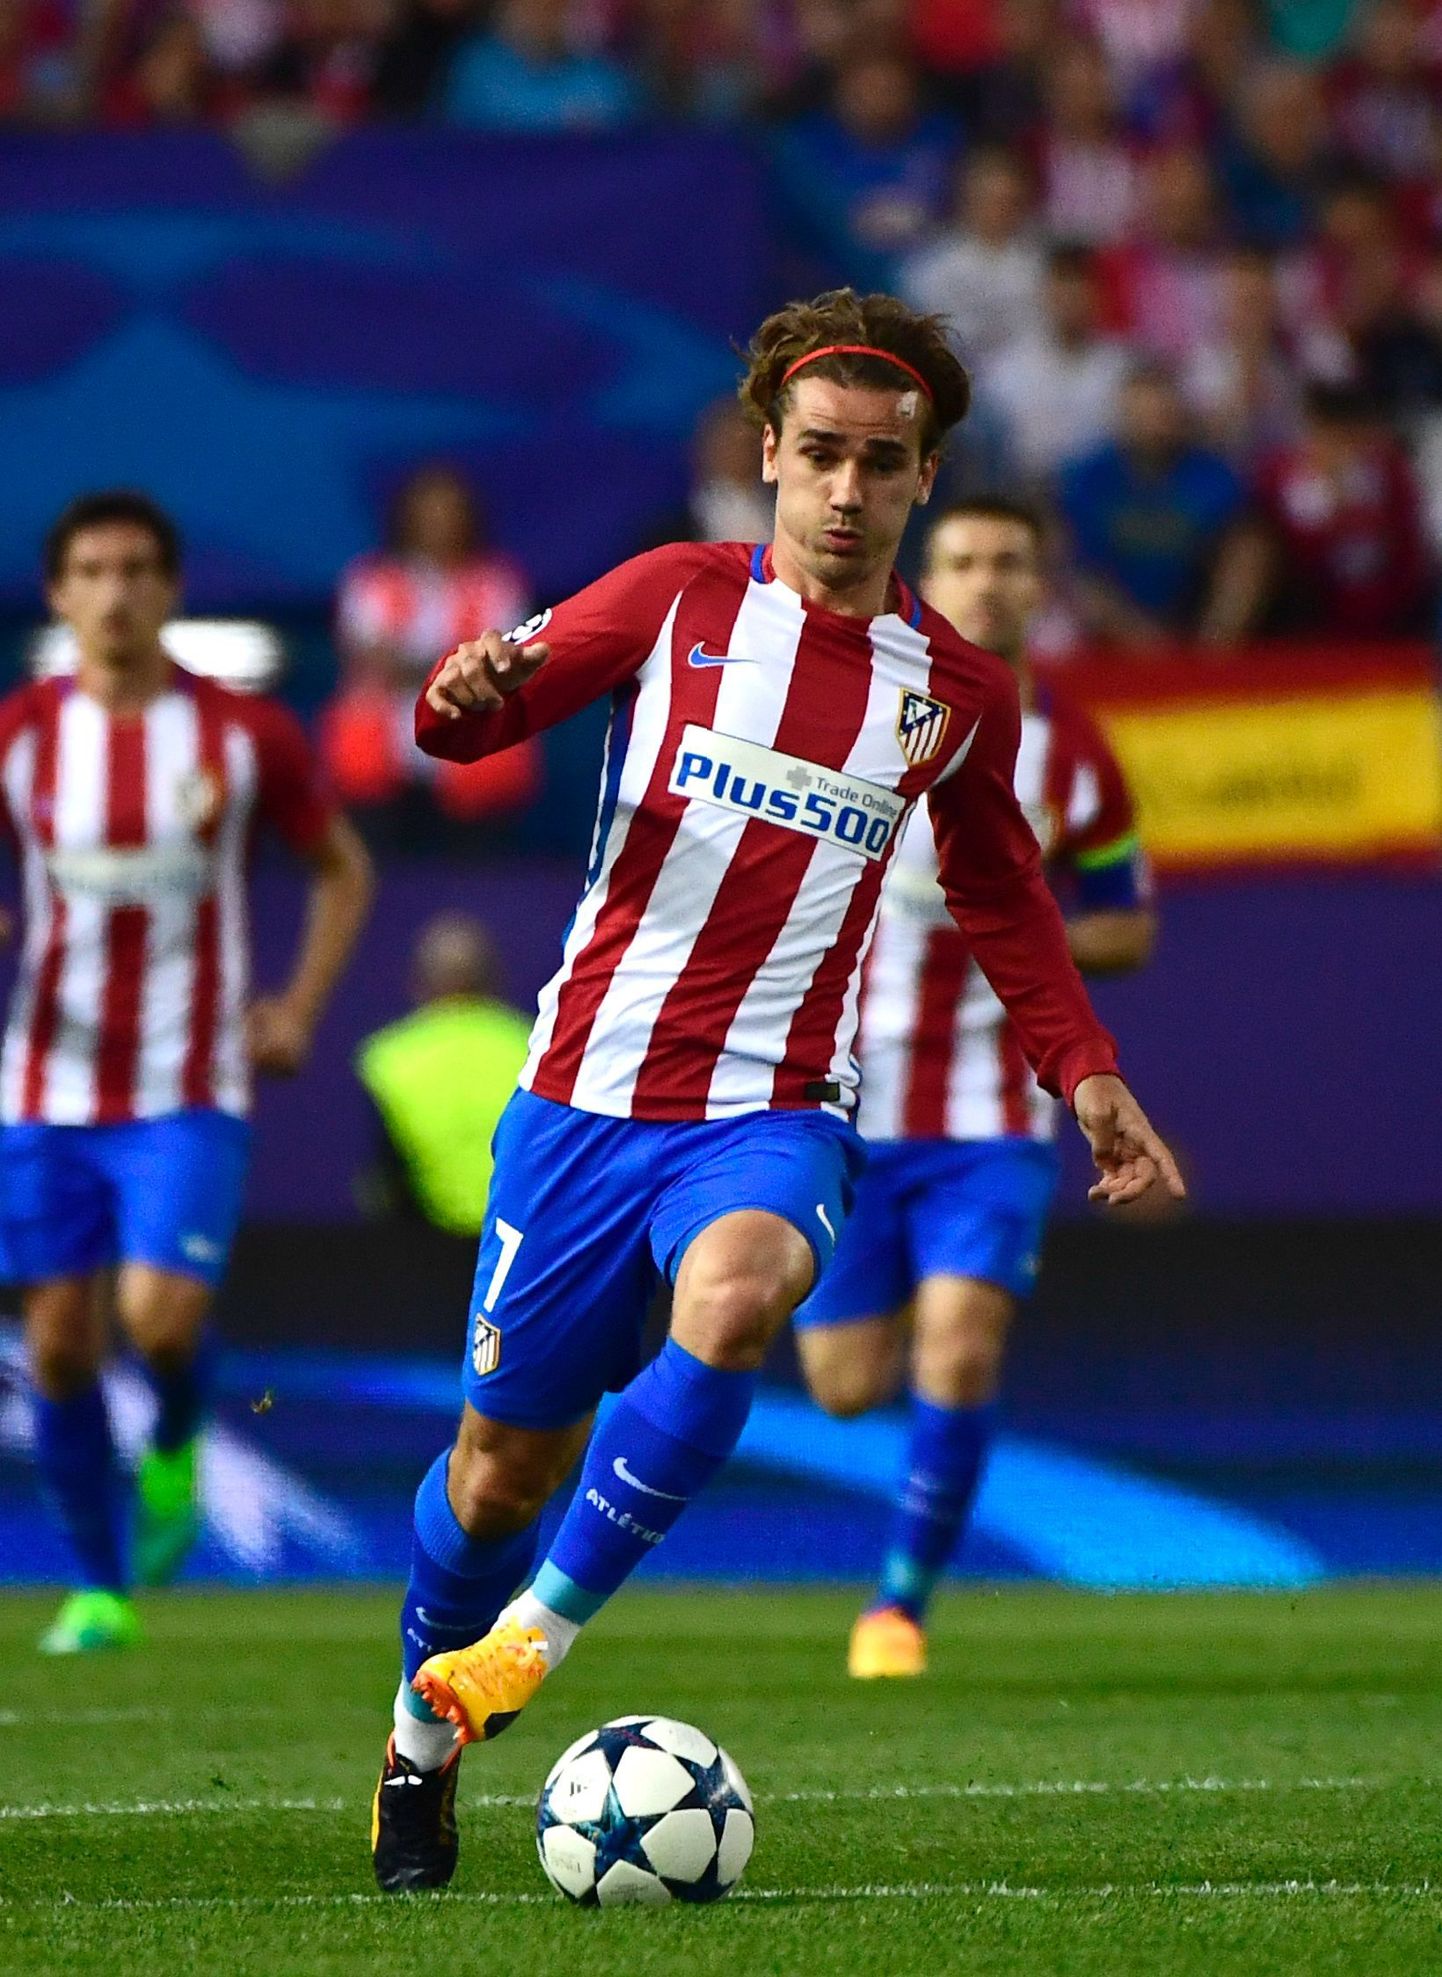 Atletico Madrid's French forward Antoine Griezmann chases a ball during the UEFA Champions League quarter final first leg football match Club Atletico de Madrid vs Leicester City at the Vicente Calderon stadium in Madrid on April 12, 2017. / AFP PHOTO / PIERRE-PHILIPPE MARCOU